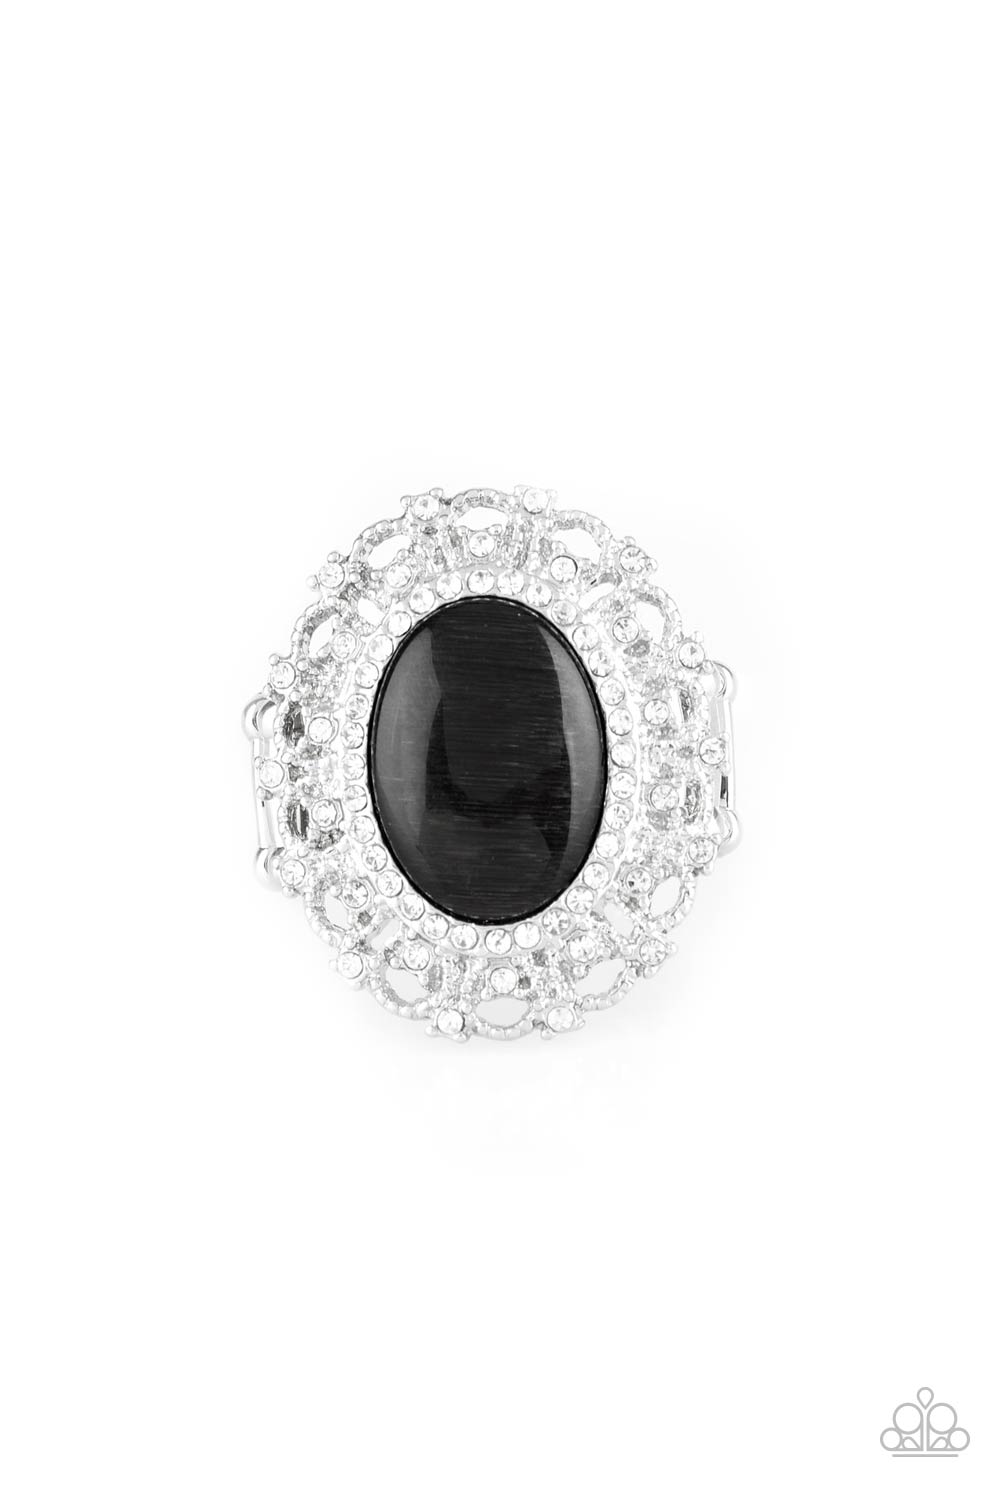 Encrusted in dainty white rhinestones, a frilly silver frame spins around a glowing black moonstone center for a regal look. Features a stretchy band for a flexible fit.  Sold as one individual ring by Paparazzi.